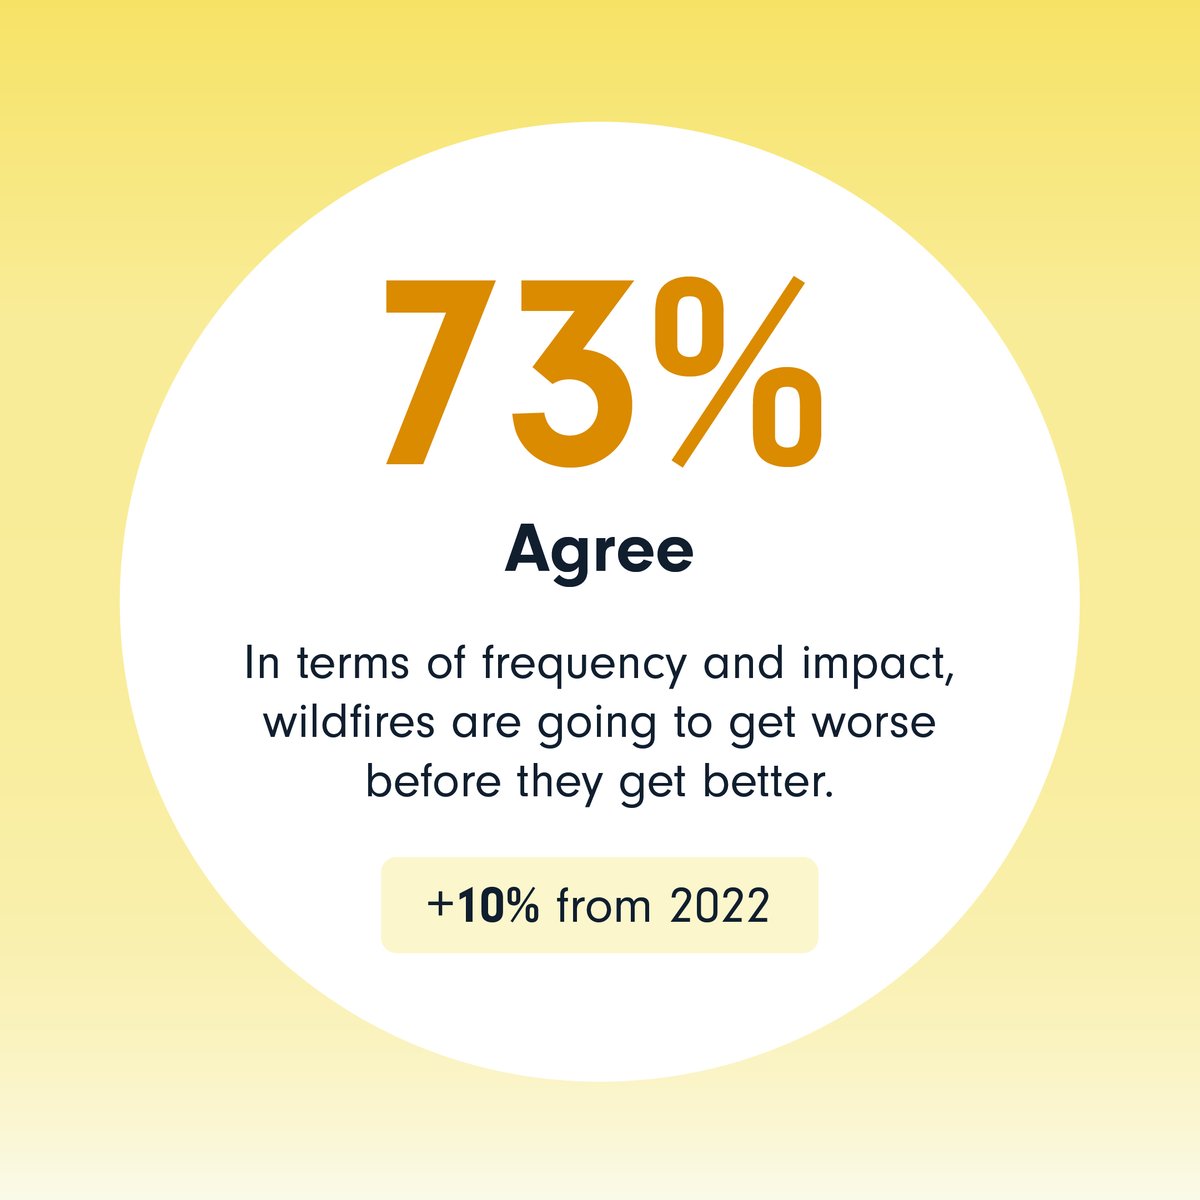 Through the FireSmart 2024 Public Perceptions Survey, we were able to determine that 68% of British Columbians believe that climate change is the primary cause for the increase in wildfire outbreaks. Find more survey results and insights at: tinyurl.com/2fn25tmx